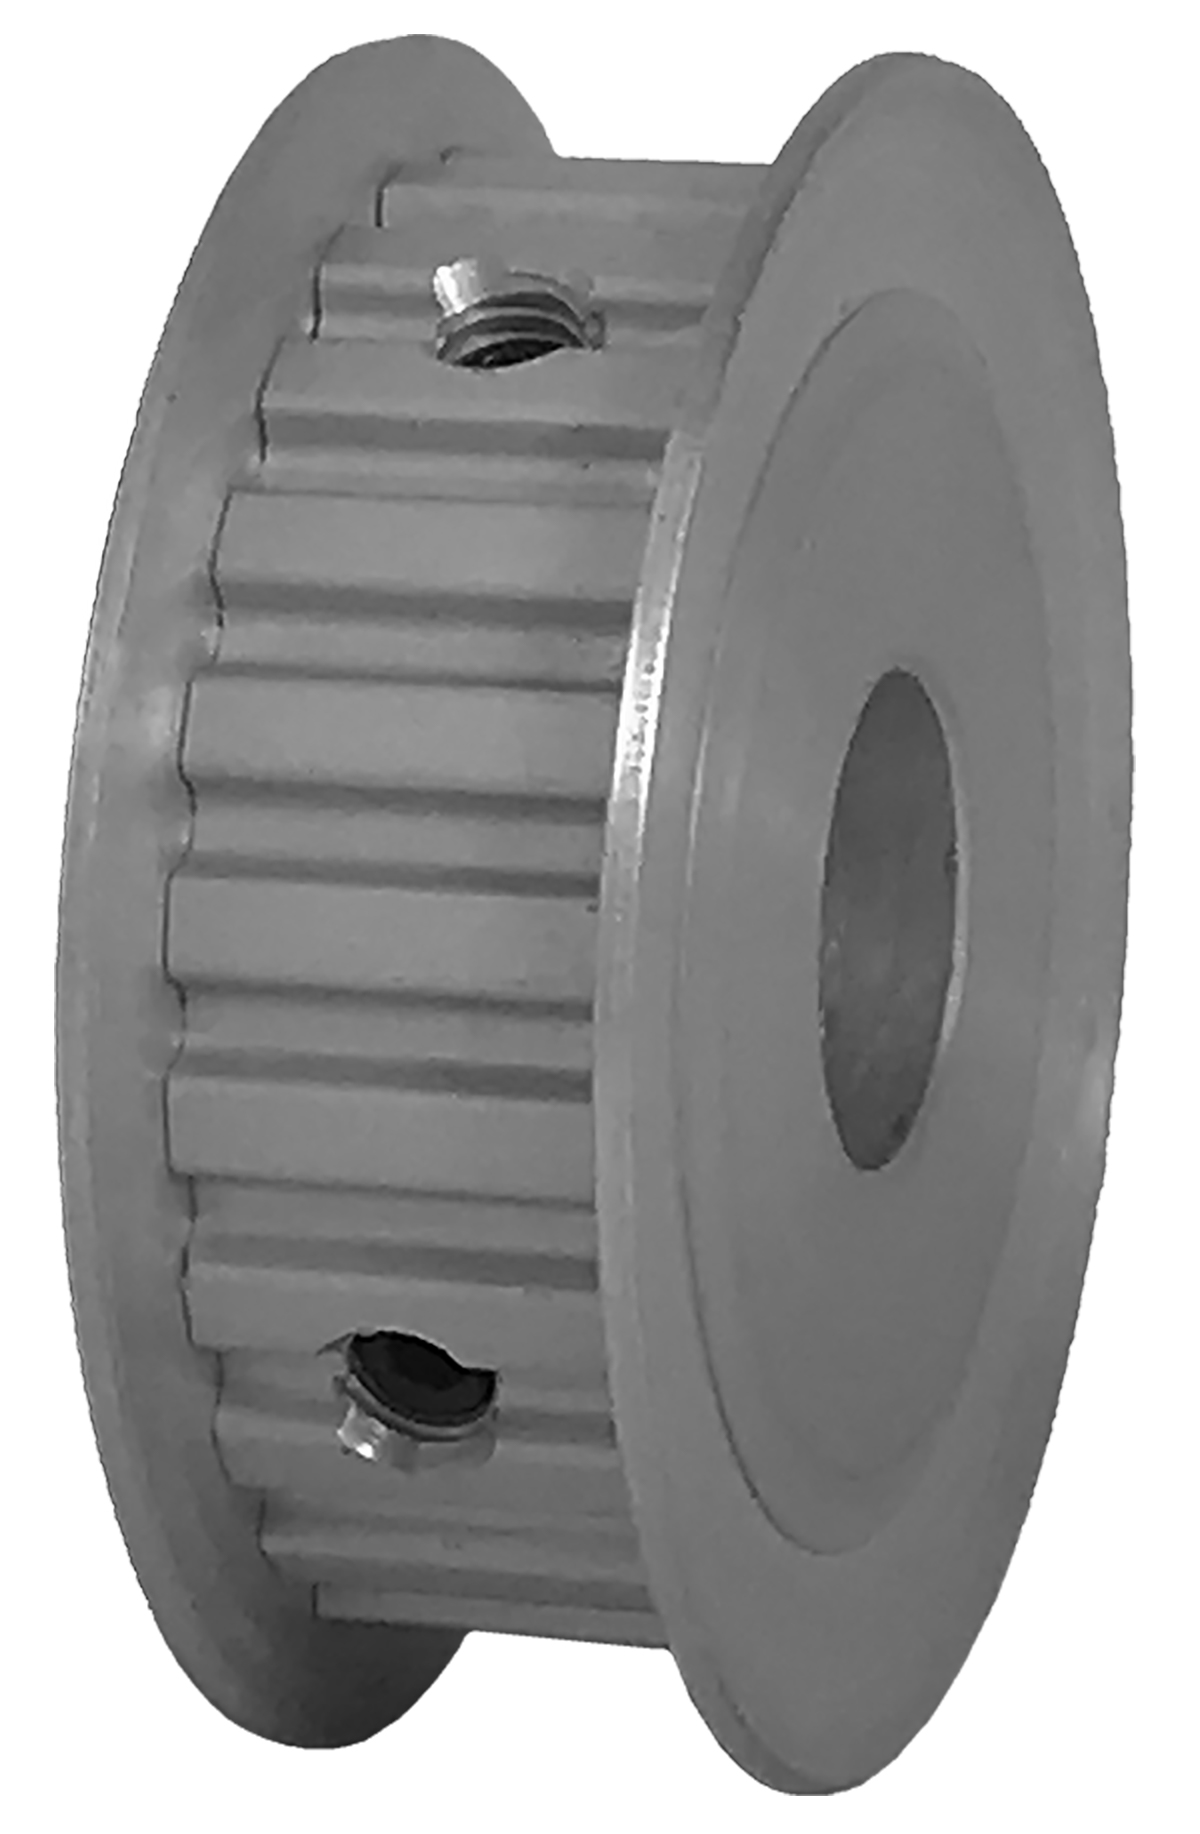 24XL037-3FA6 - Aluminum Imperial Pitch Pulleys